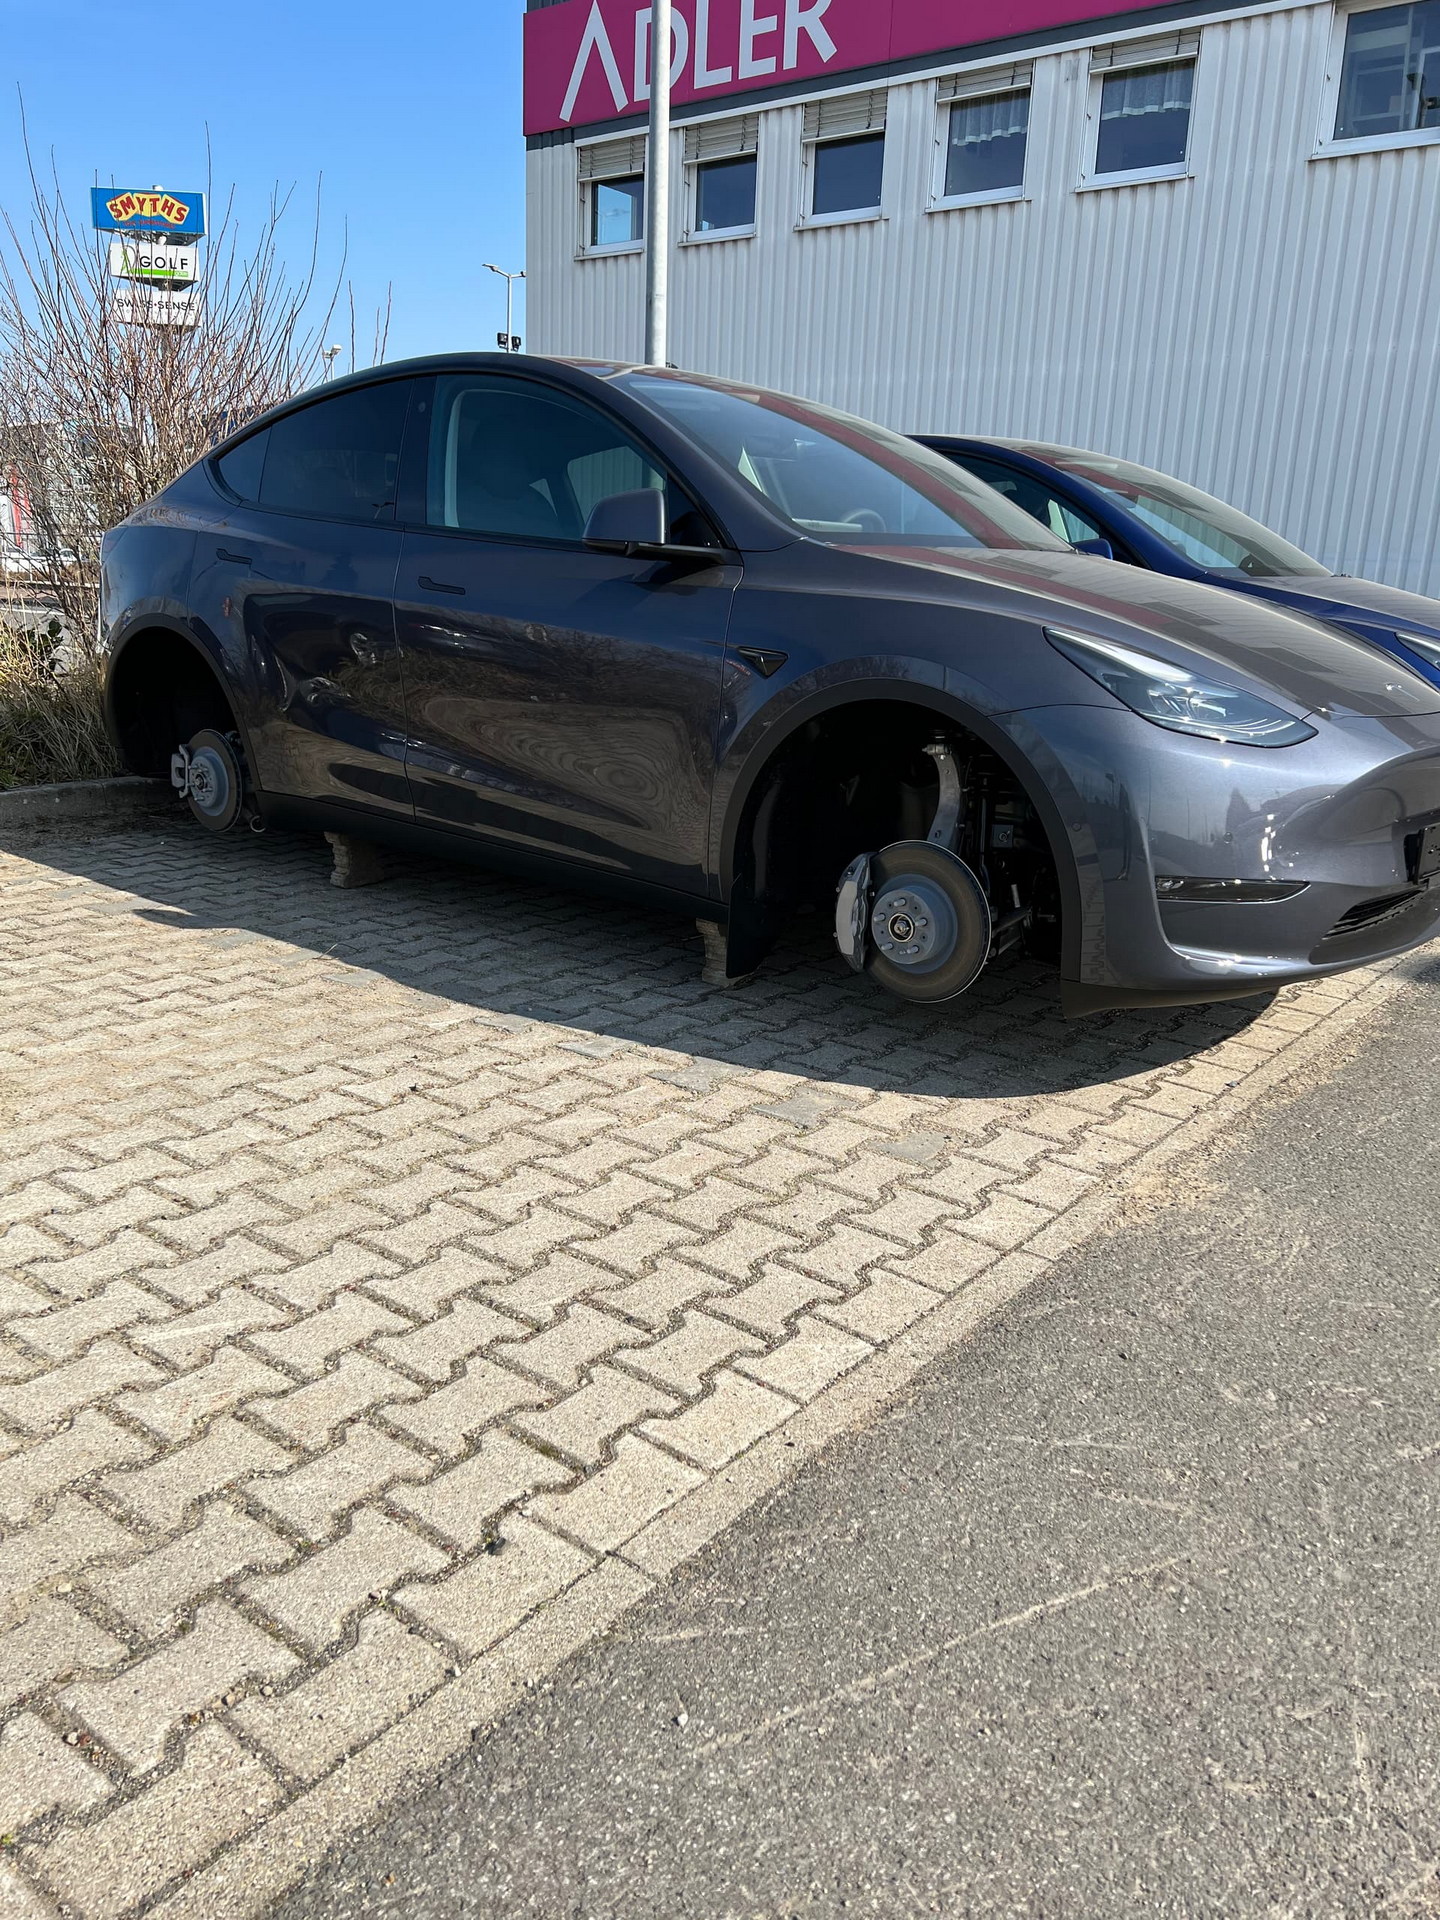 Steal Wheels And Aero Caps From Dozen Teslas Parked In German Delivery |